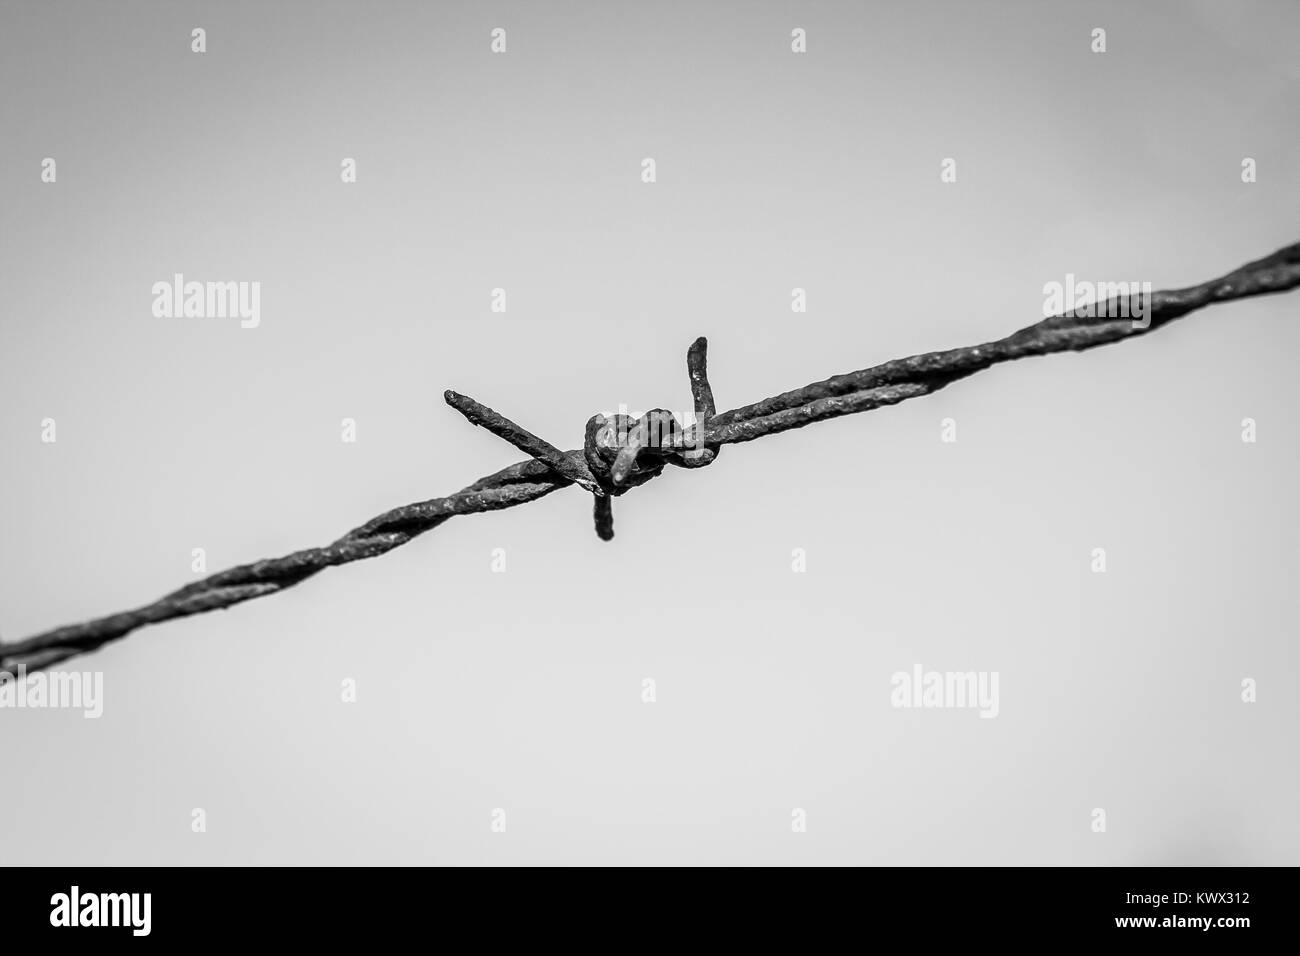 A spike Black and White Stock Photos & Images - Page 2 - Alamy